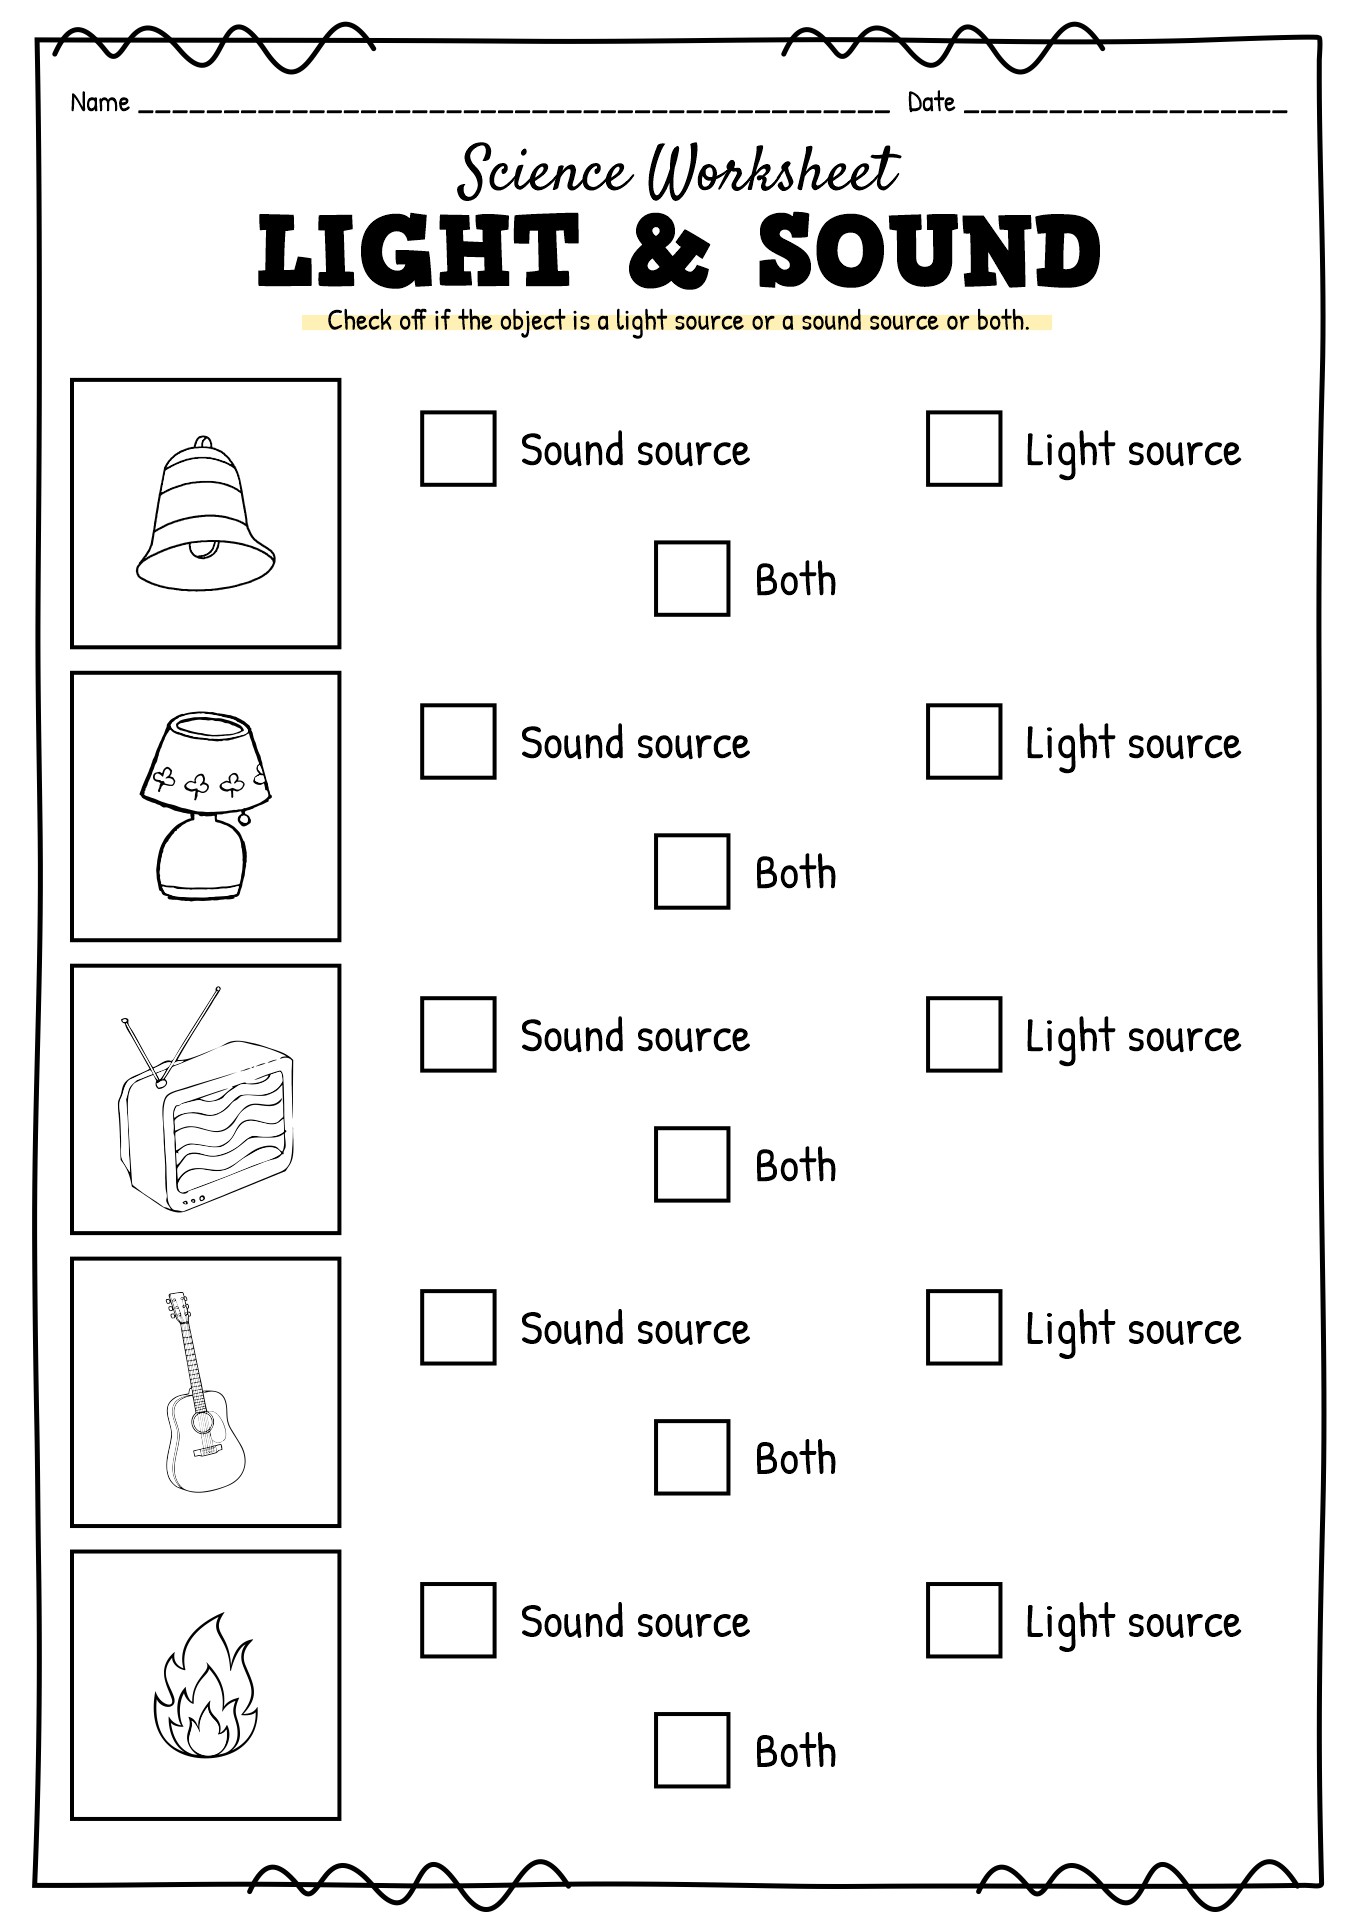 Light and Sound Science Worksheet First Grade Image